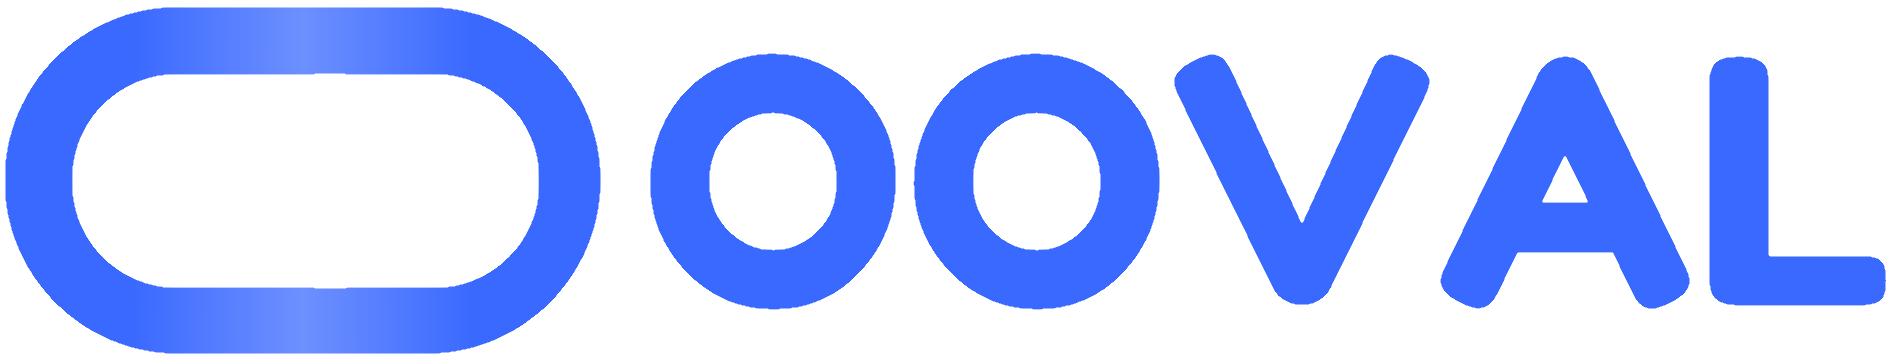 ooval logo